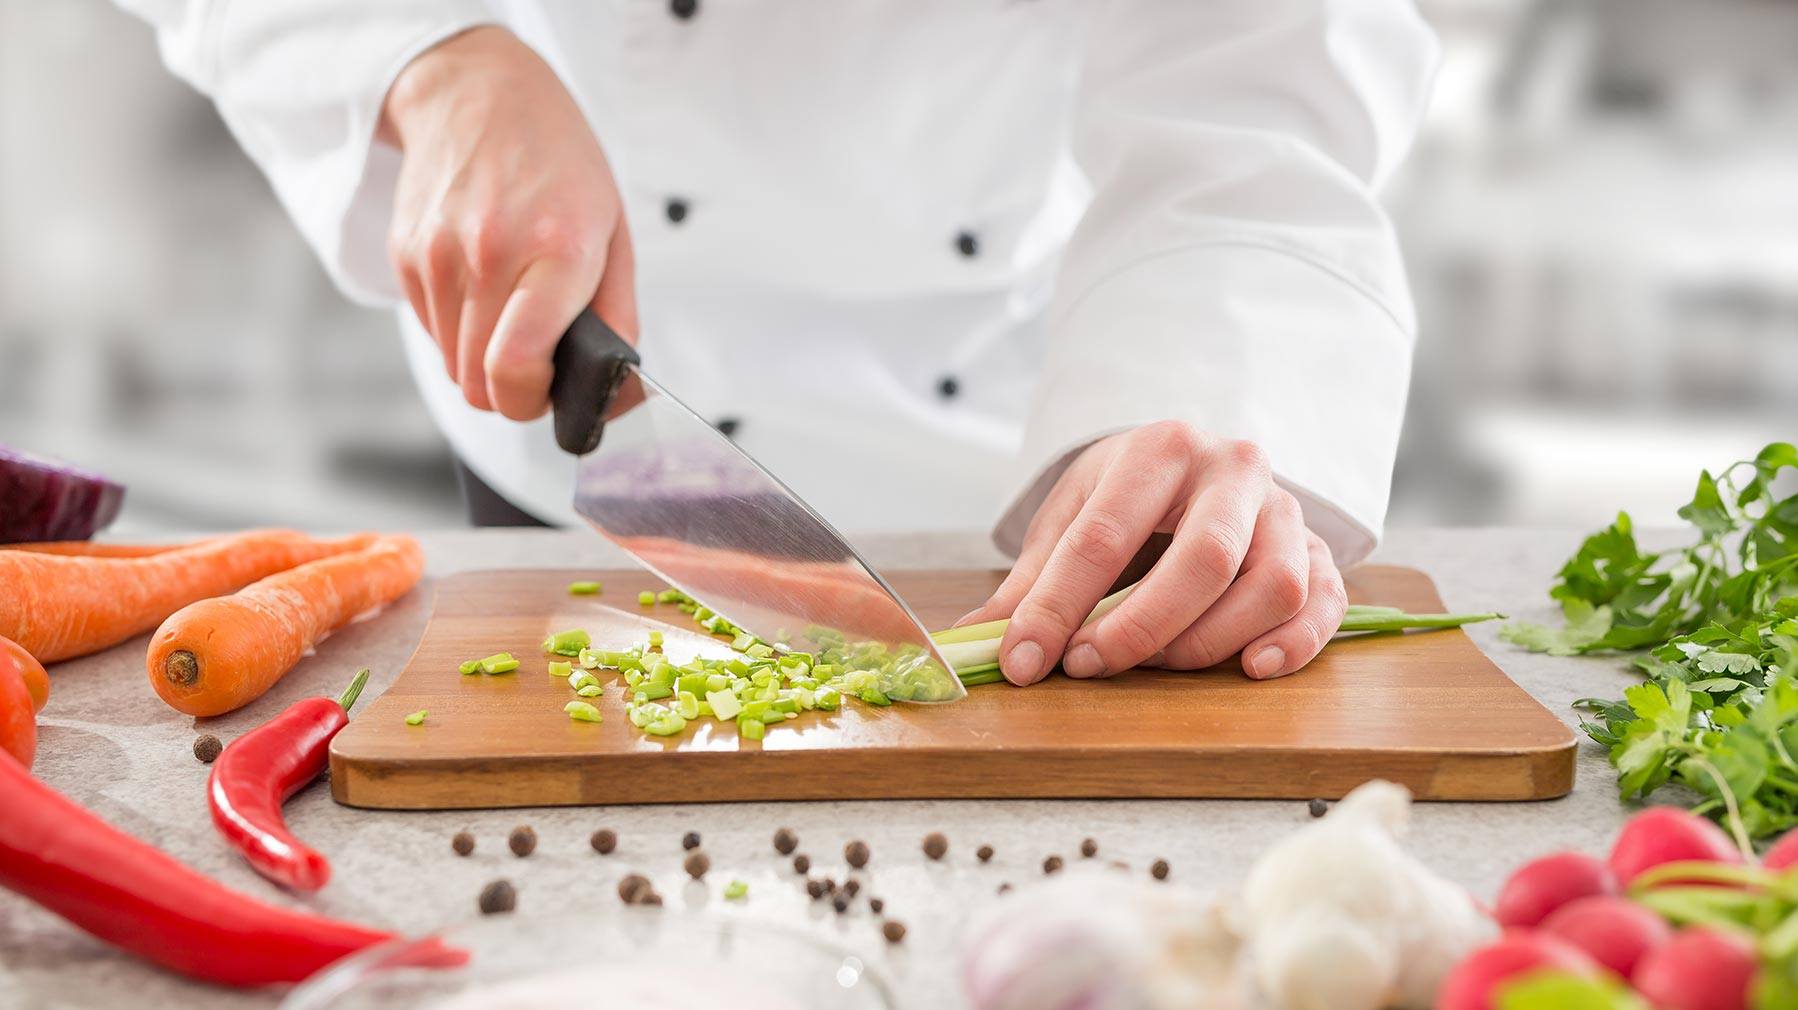 Professional Cookery and Food and Beverage Service - Level 2 ...